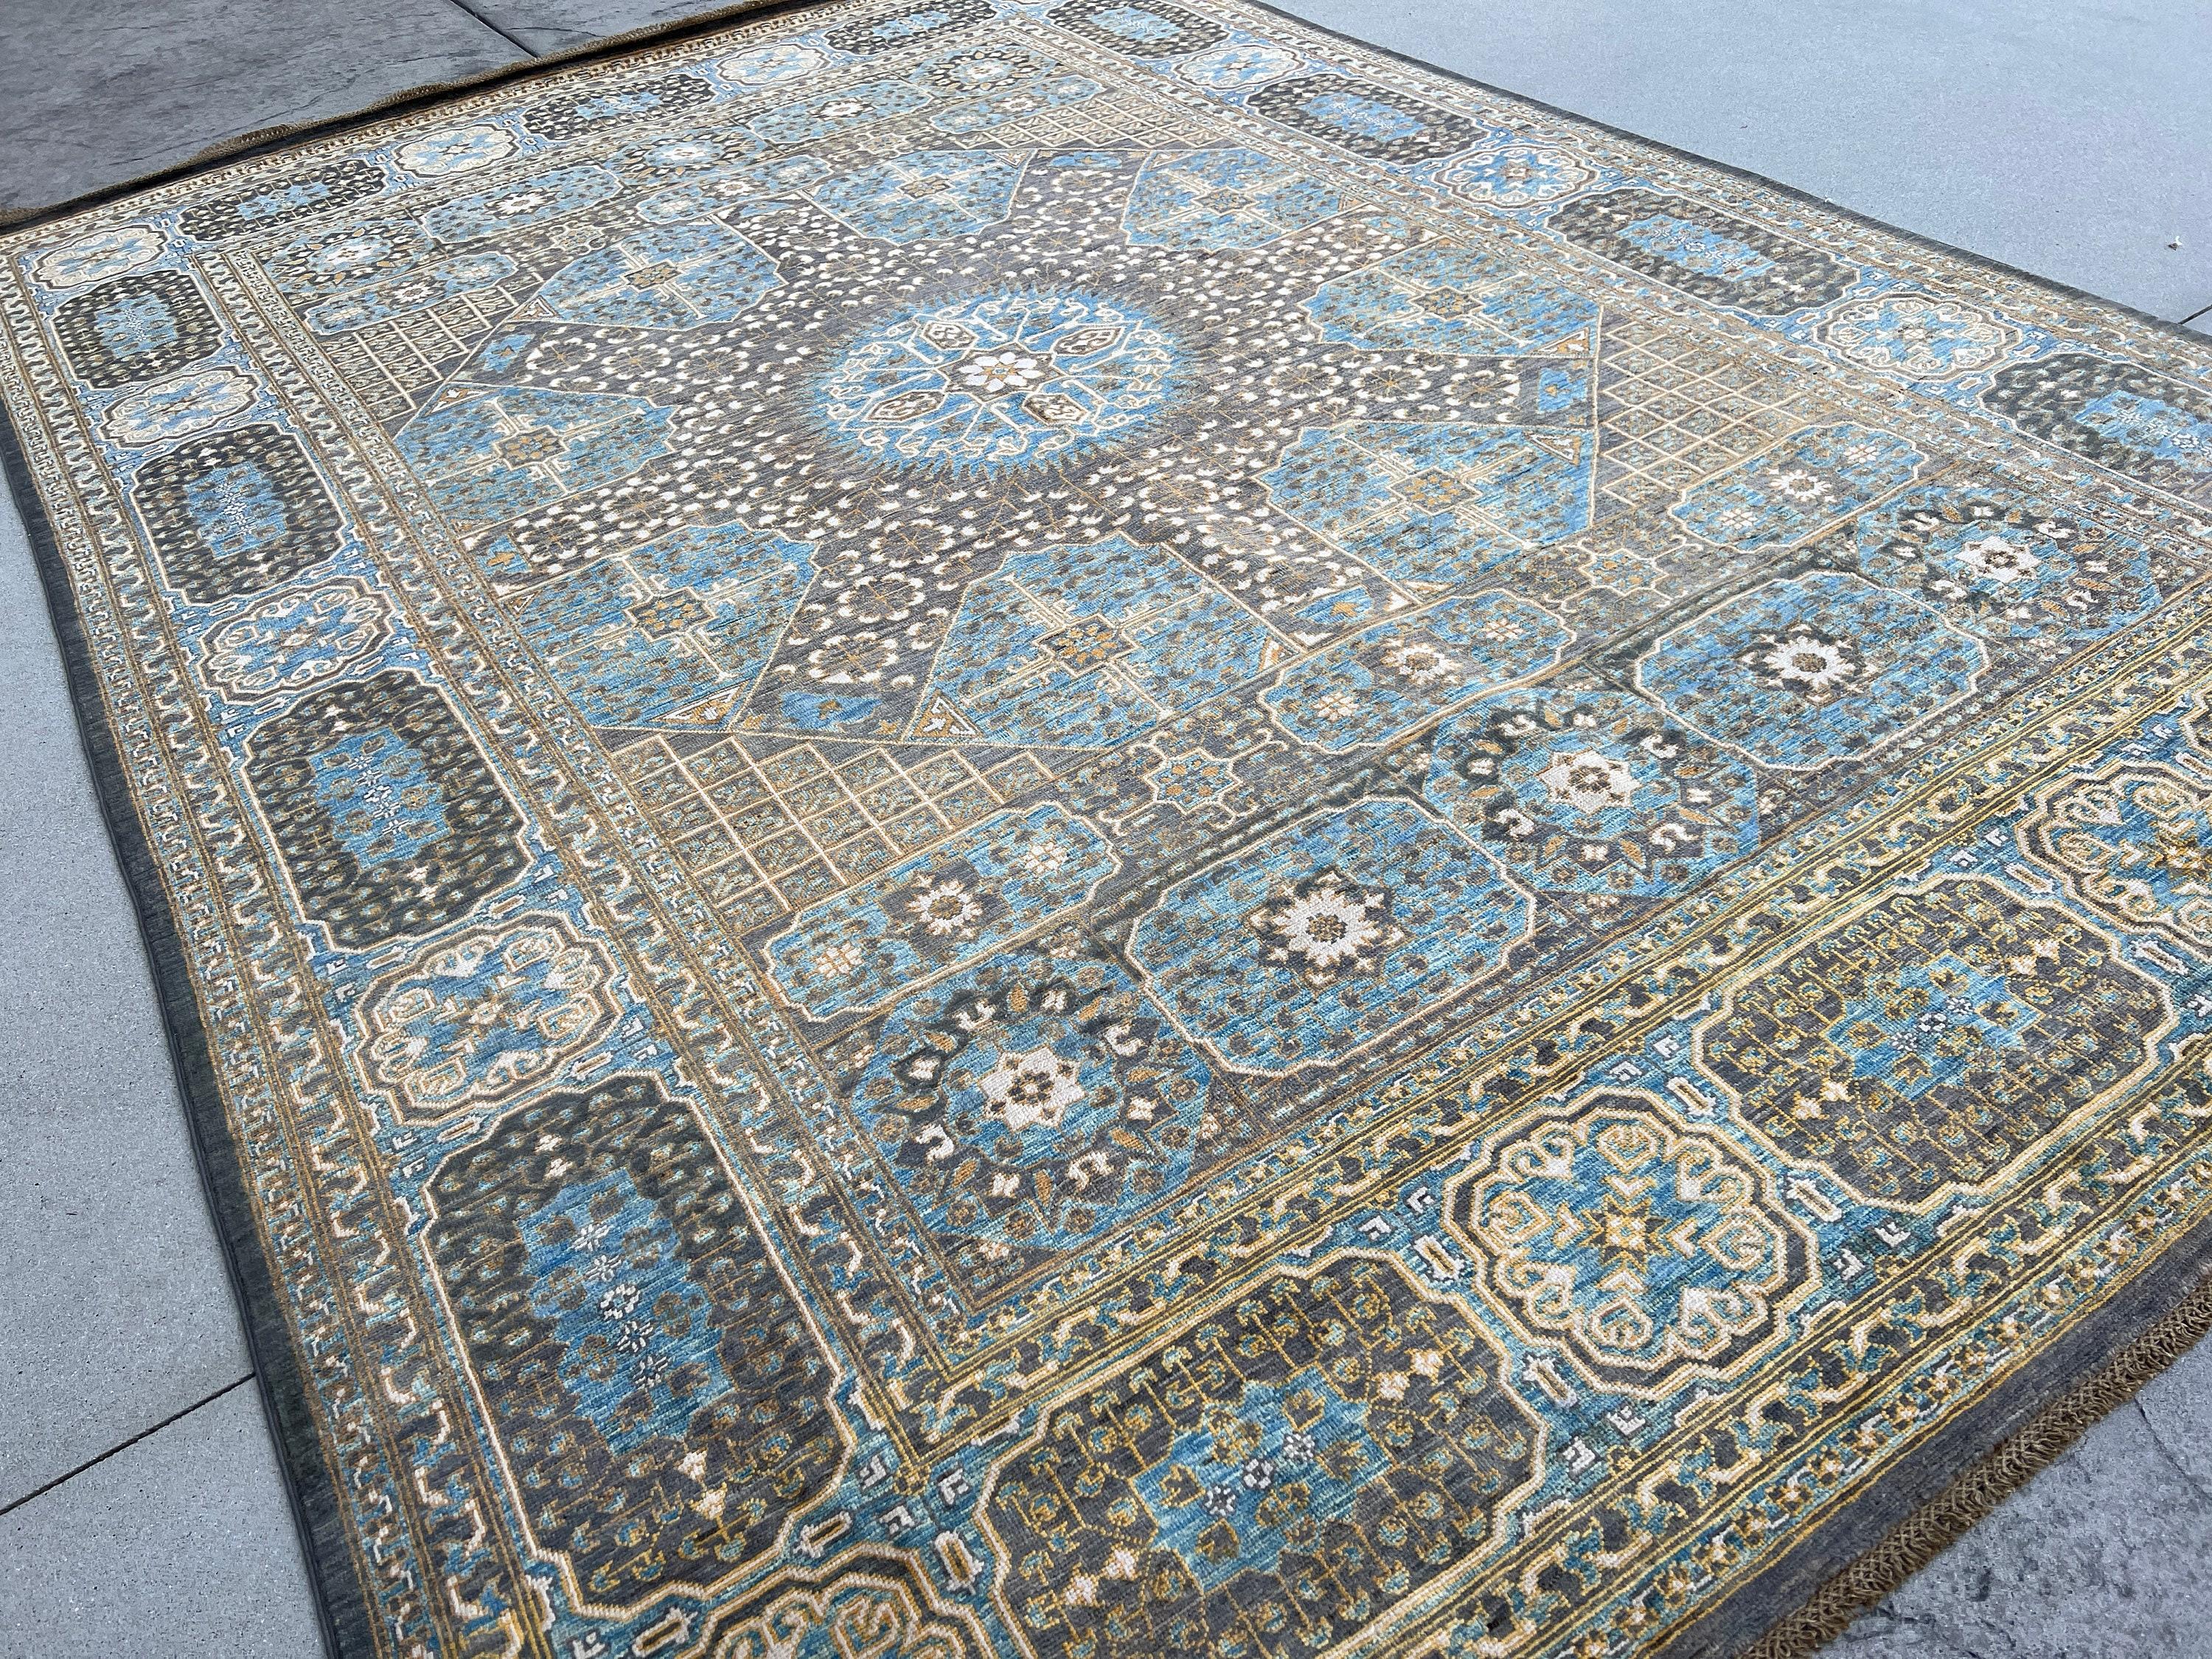 Luxury Hand-Knotted Afghan Rug Mamluk Premium Hand-Spun Afghan Woo In New Condition For Sale In San Marcos, CA